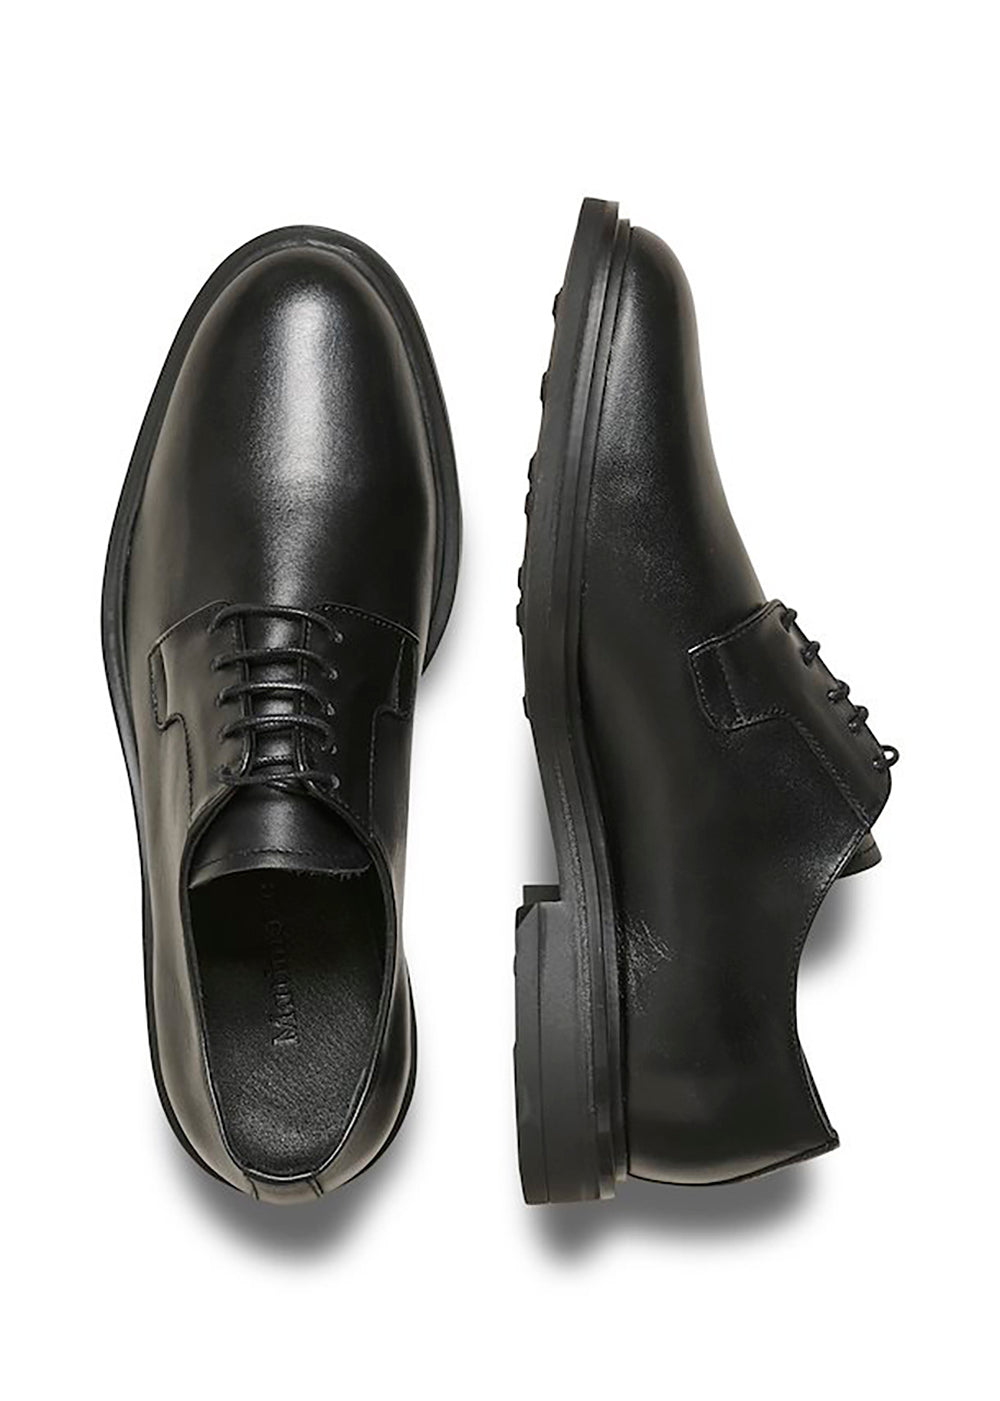 Fitch Smooth Derby Shoes - Black - Matinique Canada - Danali